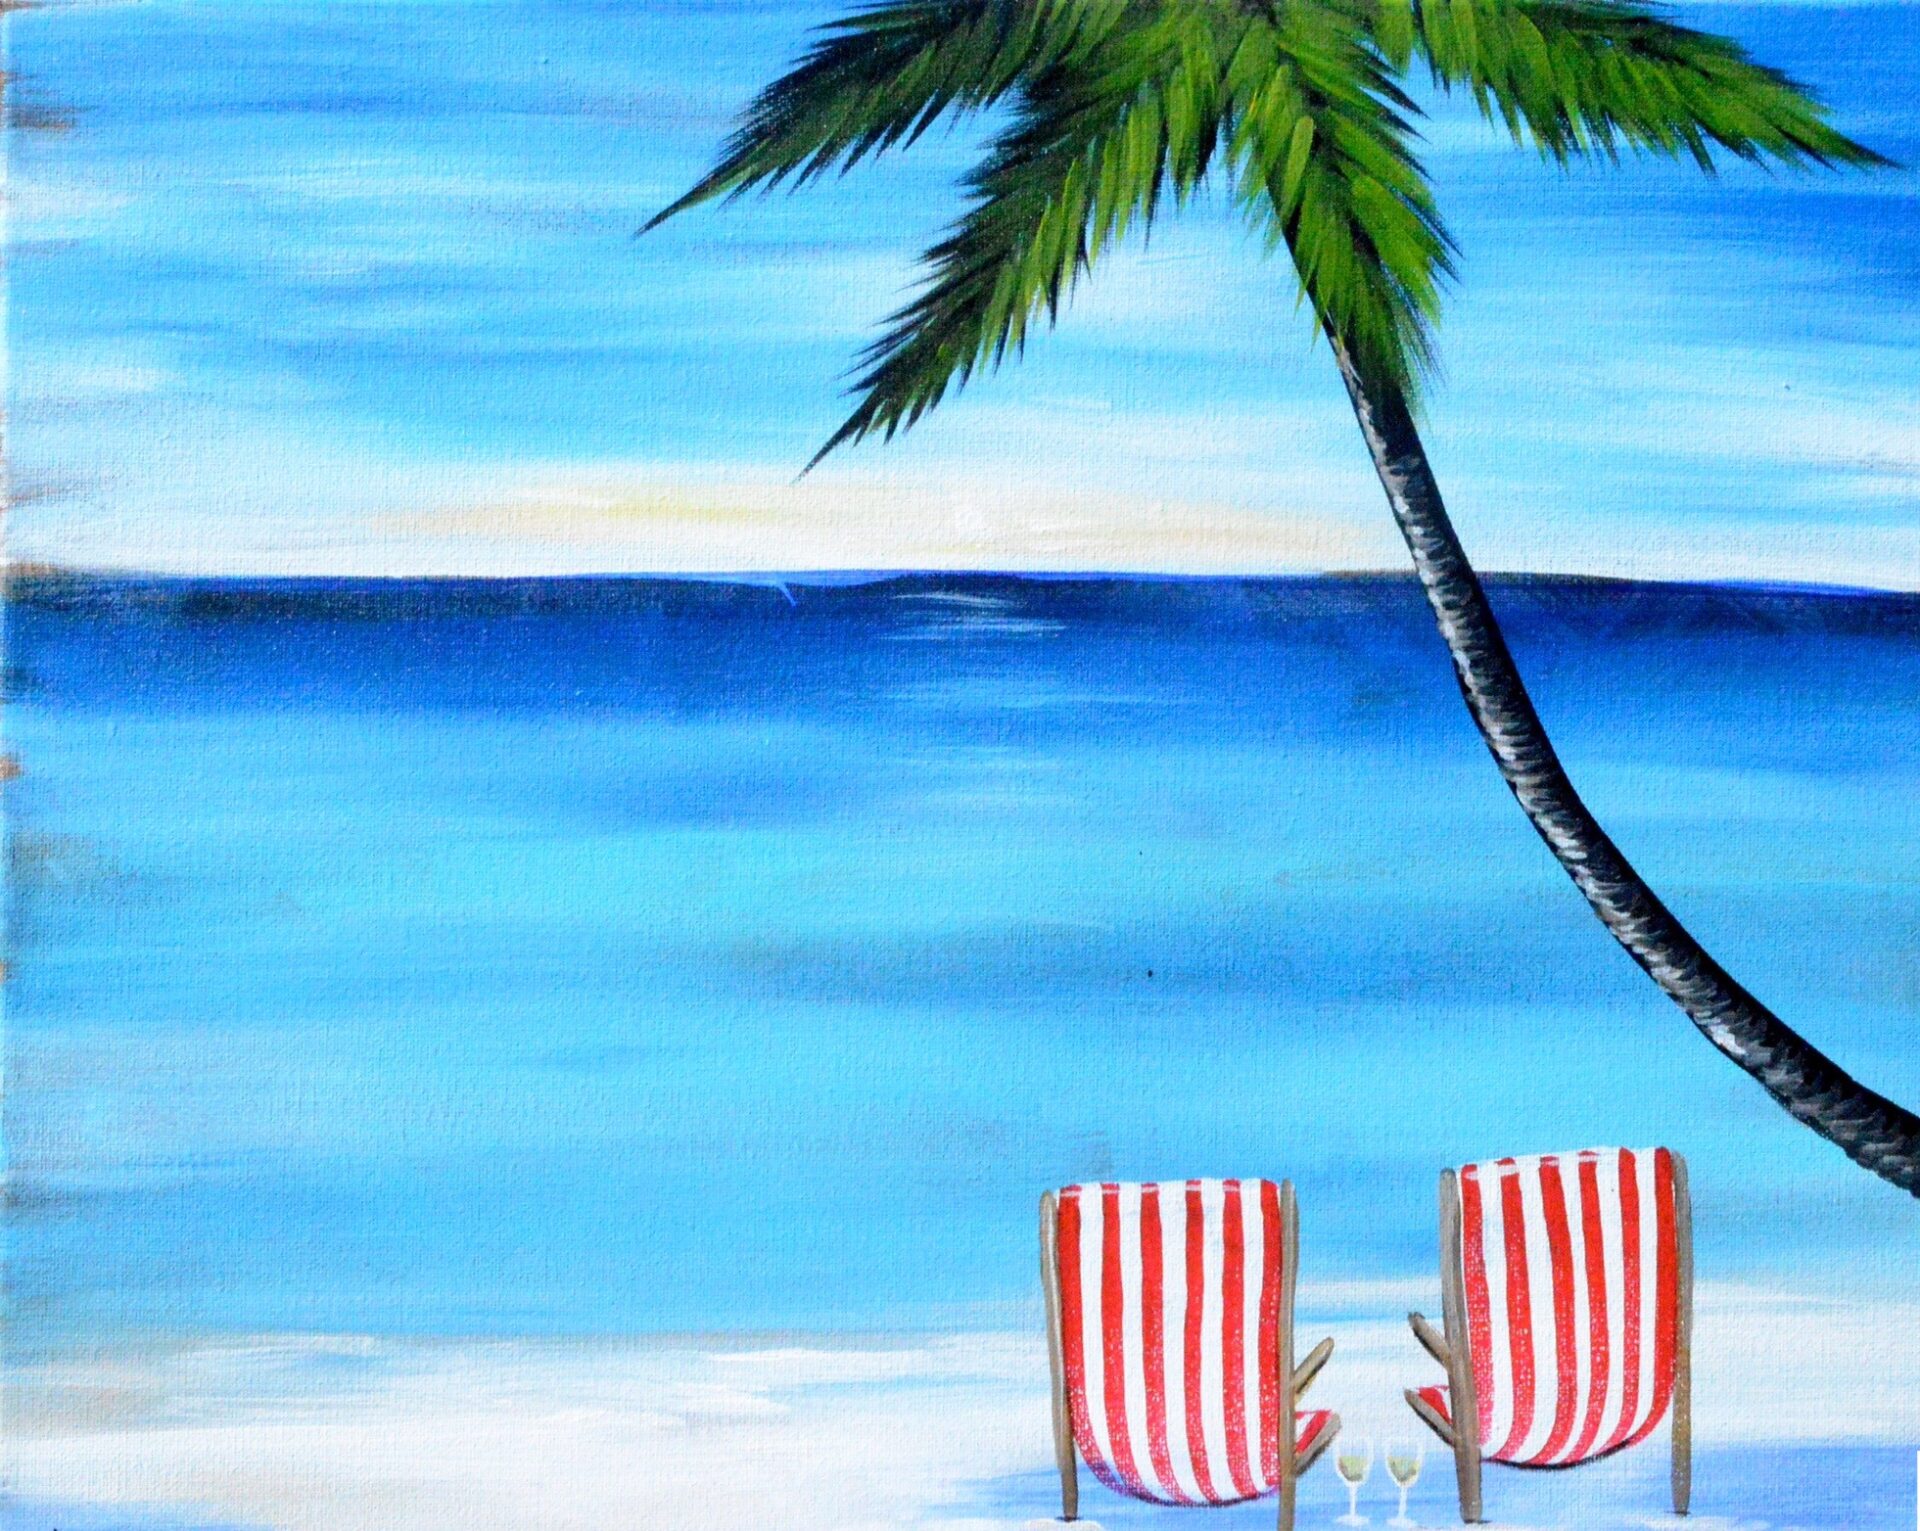 Celebrating by the Ocean from uptown paint and sip painting classes in Jupiter FL